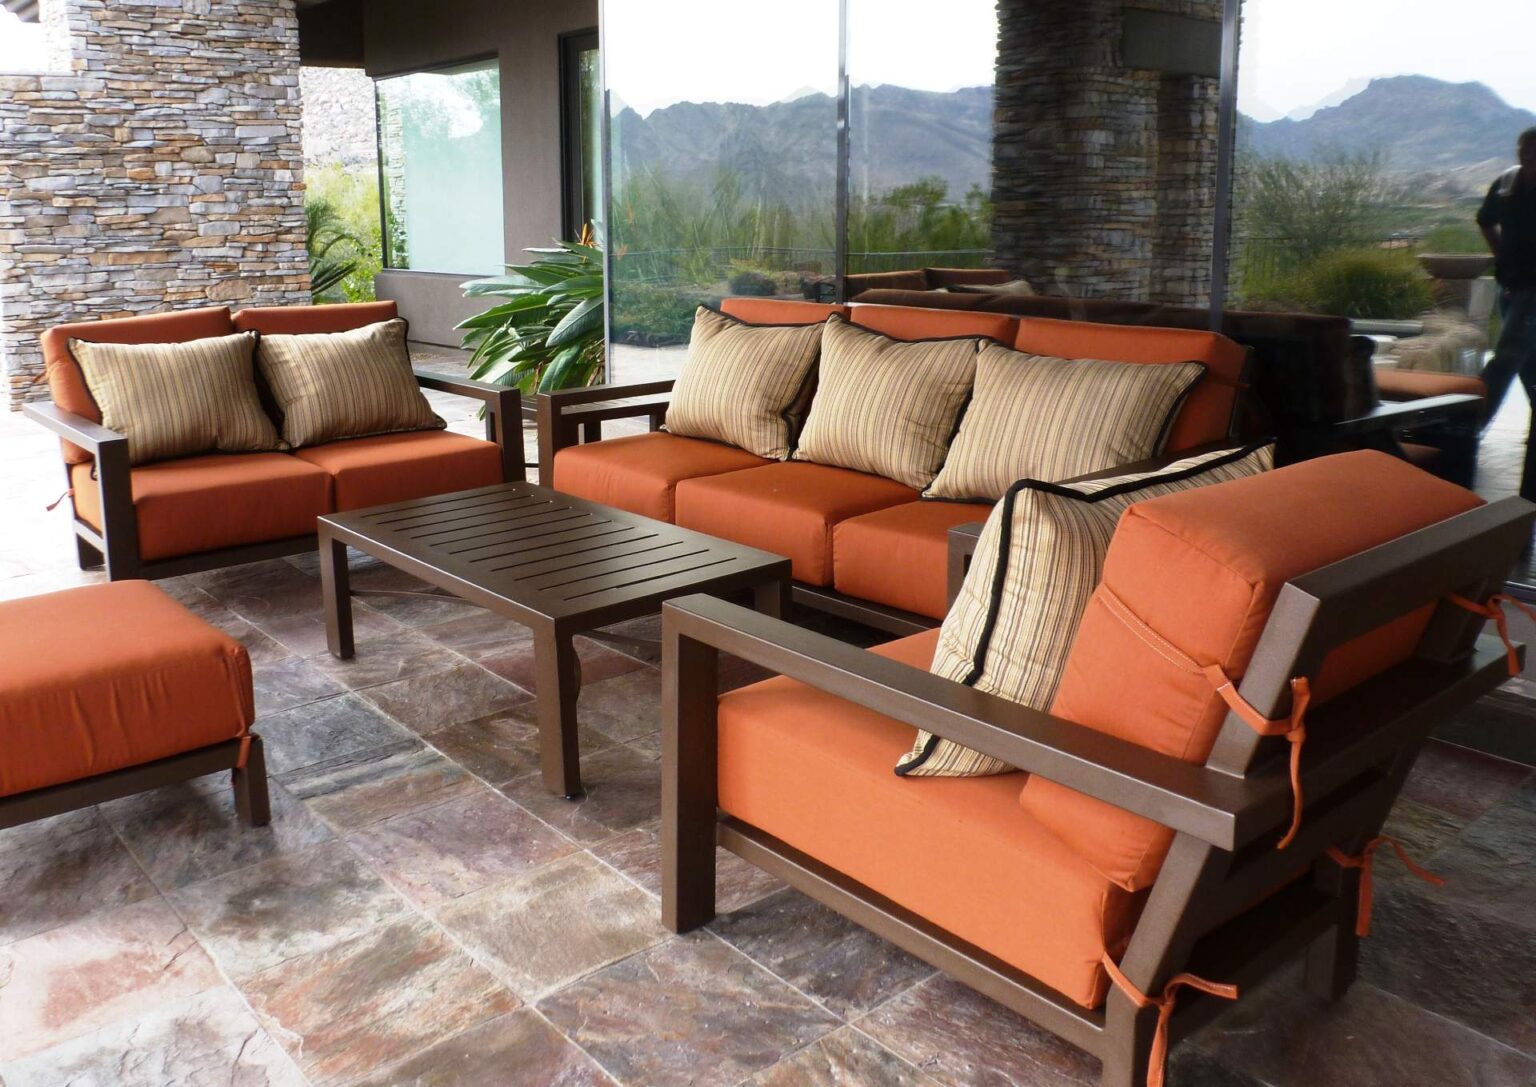 Patio furniture can be tricky to keep clean. Here are some cleaning tips on how to keep the cushions looking spotless.